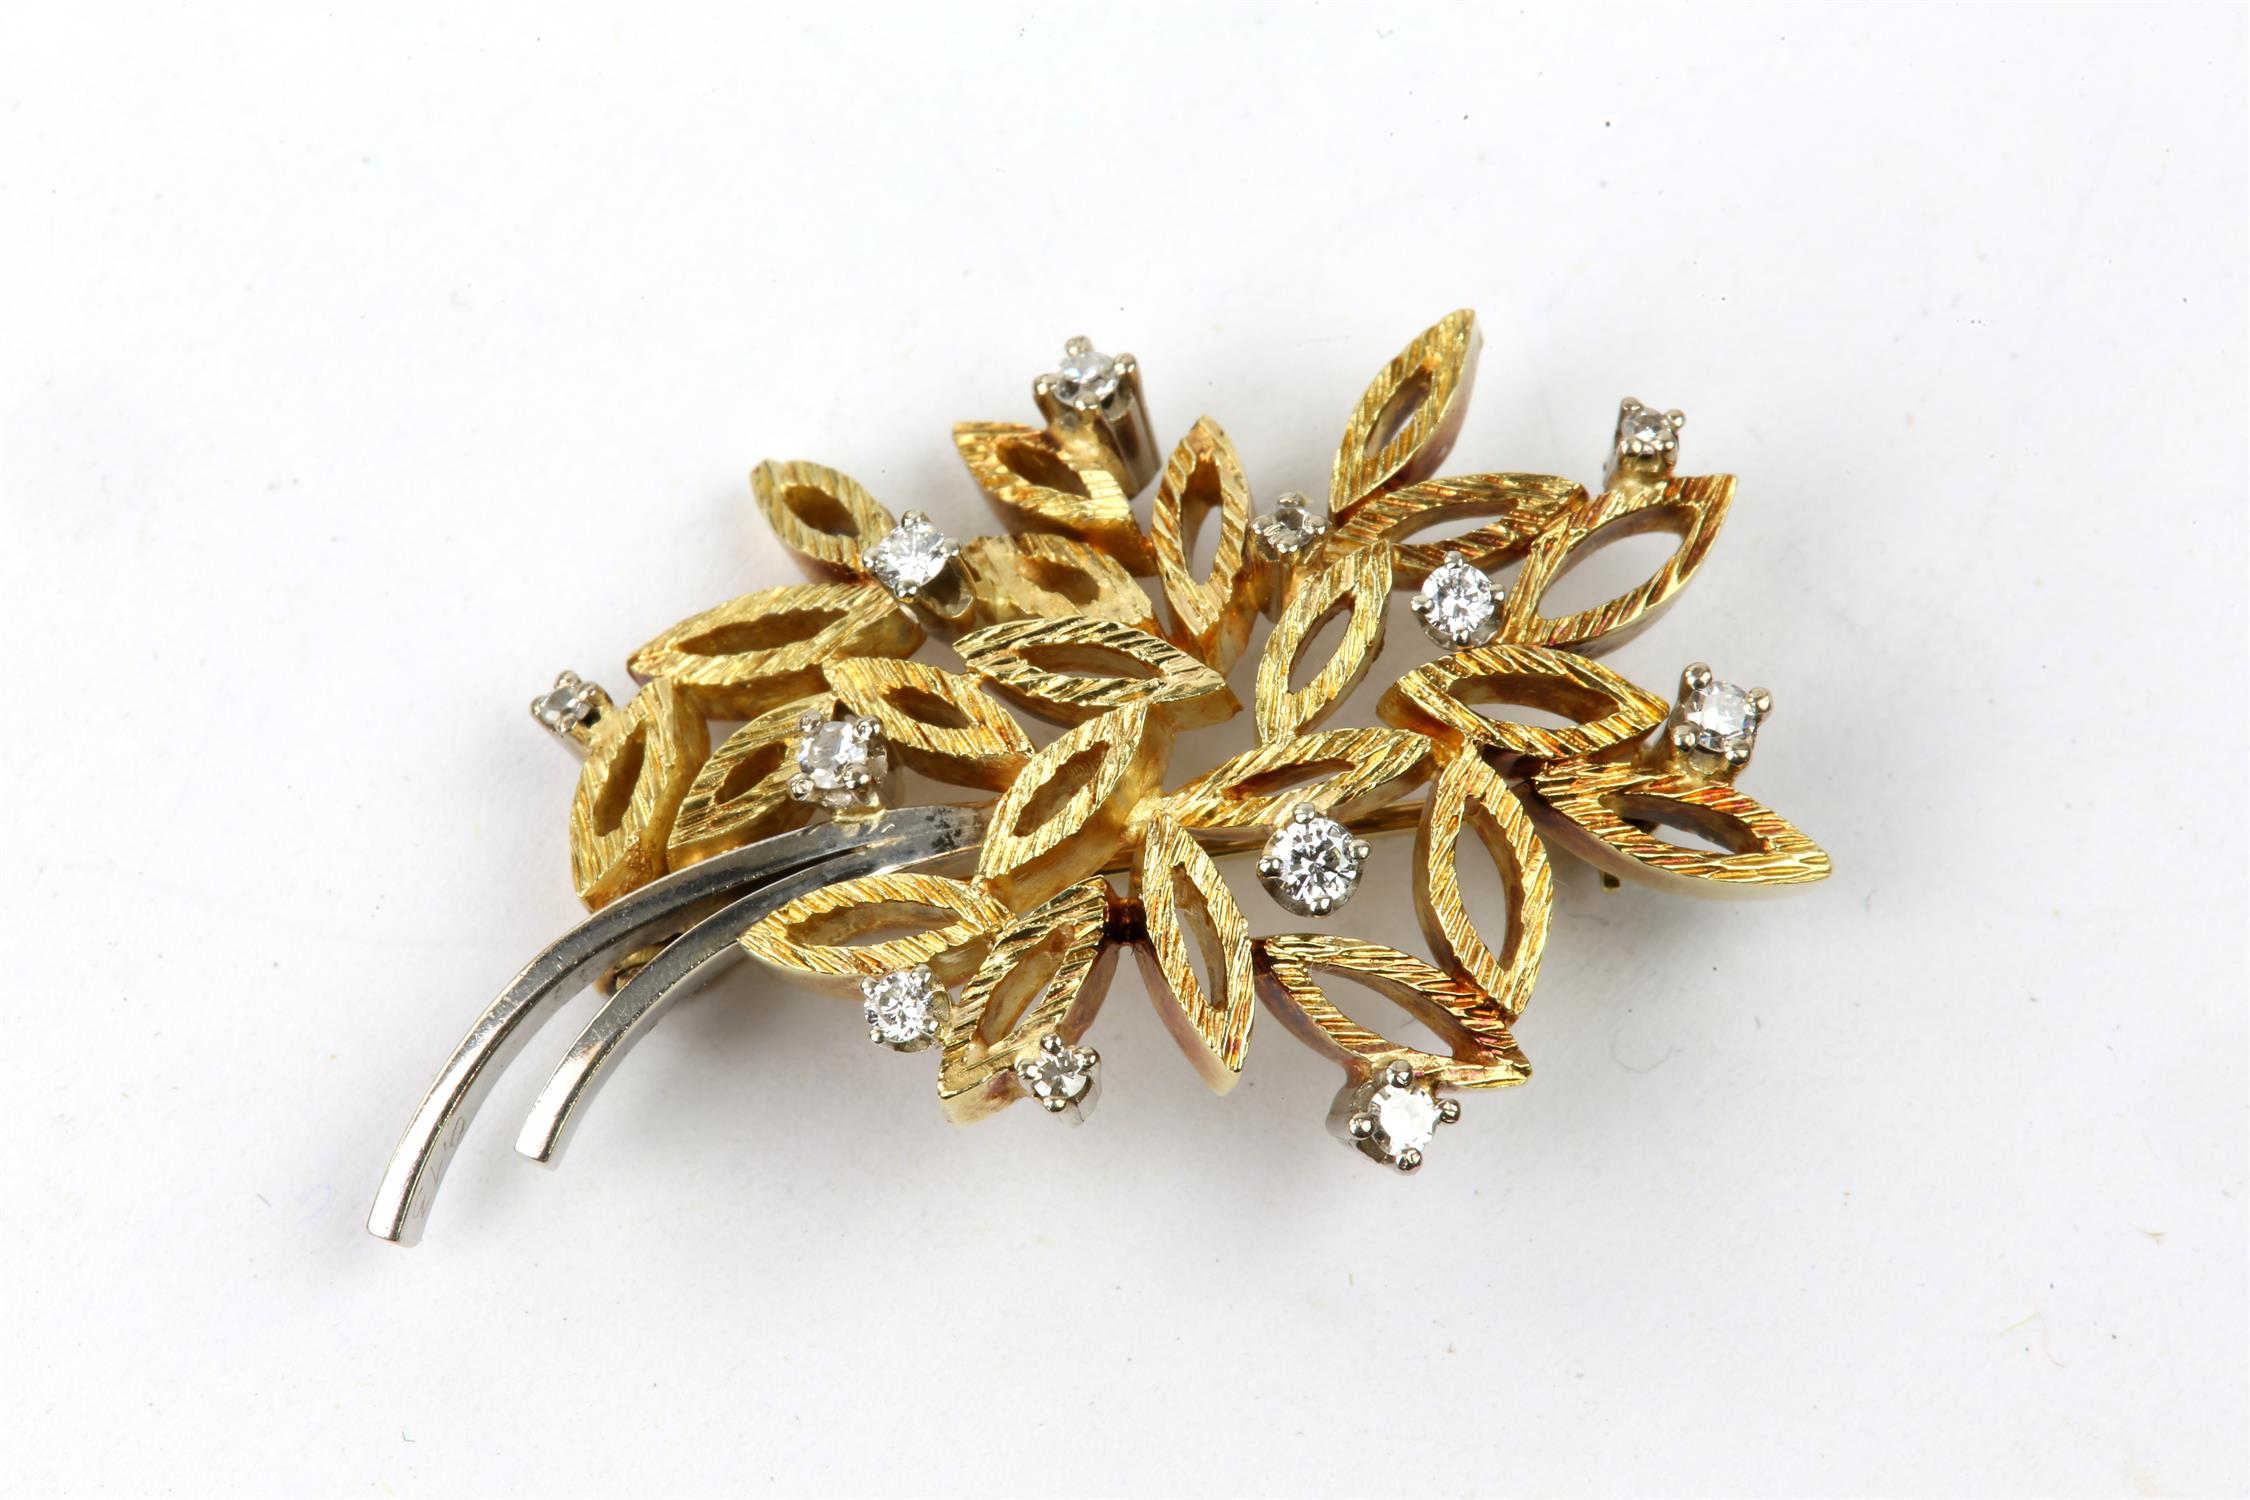 Diamond set brooch, small single cut and round brilliant cut diamonds mounted in a bunch of flowers